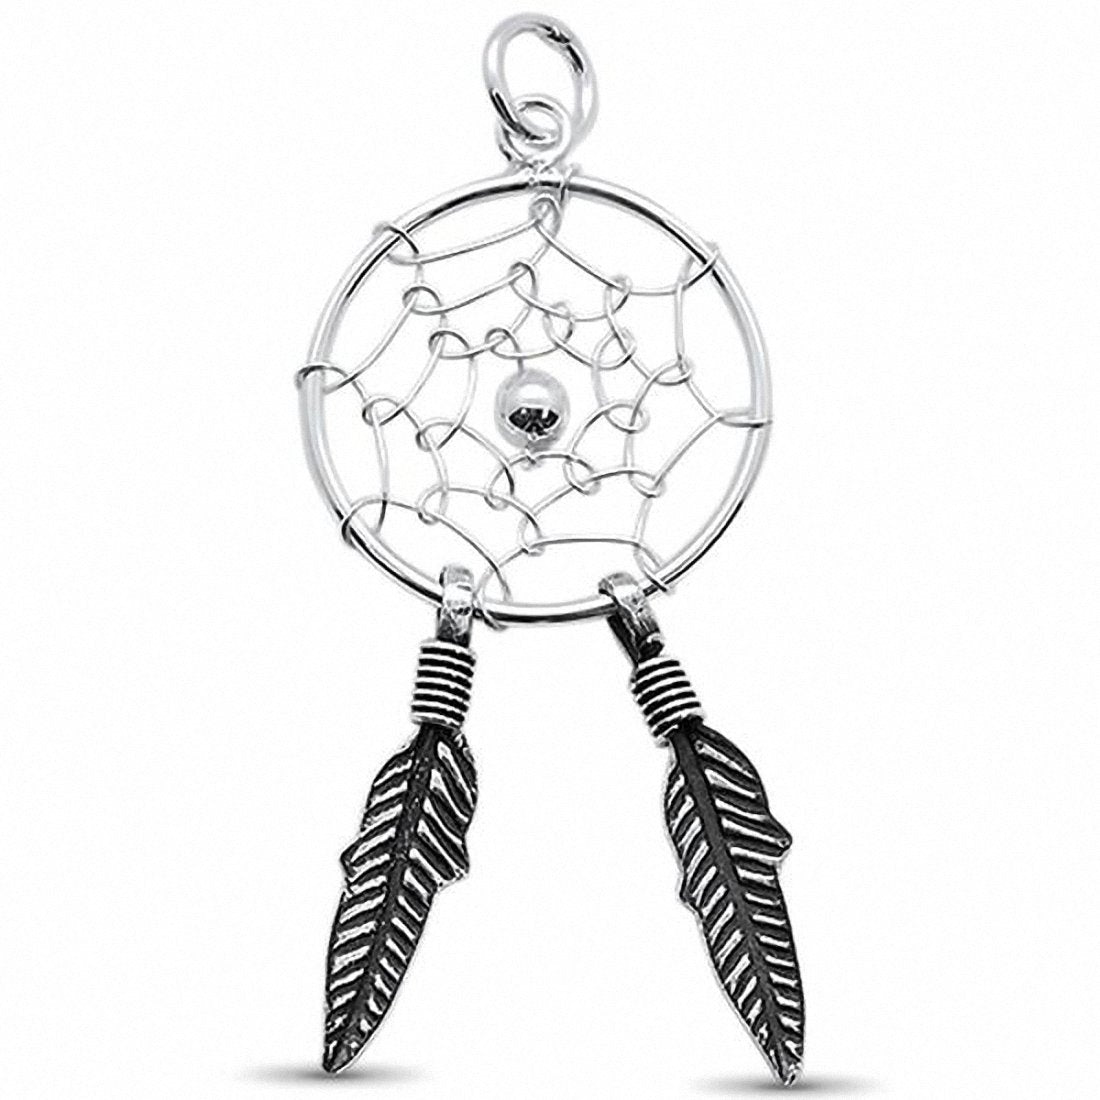 Dream catcher Pendant Feather Charm 925 Sterling Silver Choose color